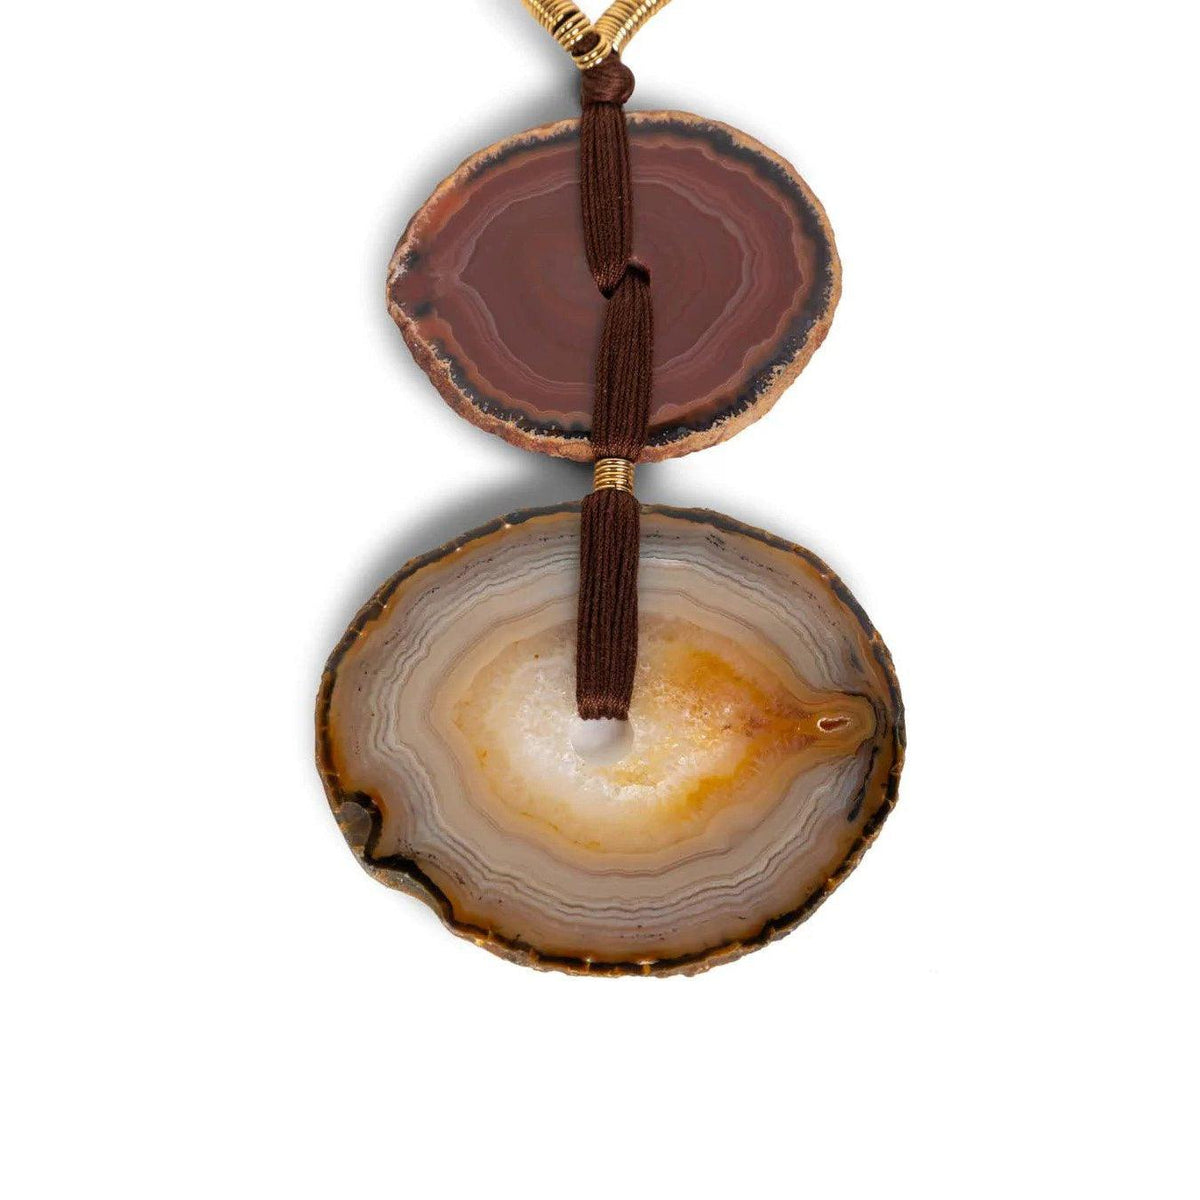 YVES SAINT LAURENT Agate Disc Pendant Necklace 2010 - theREMODA